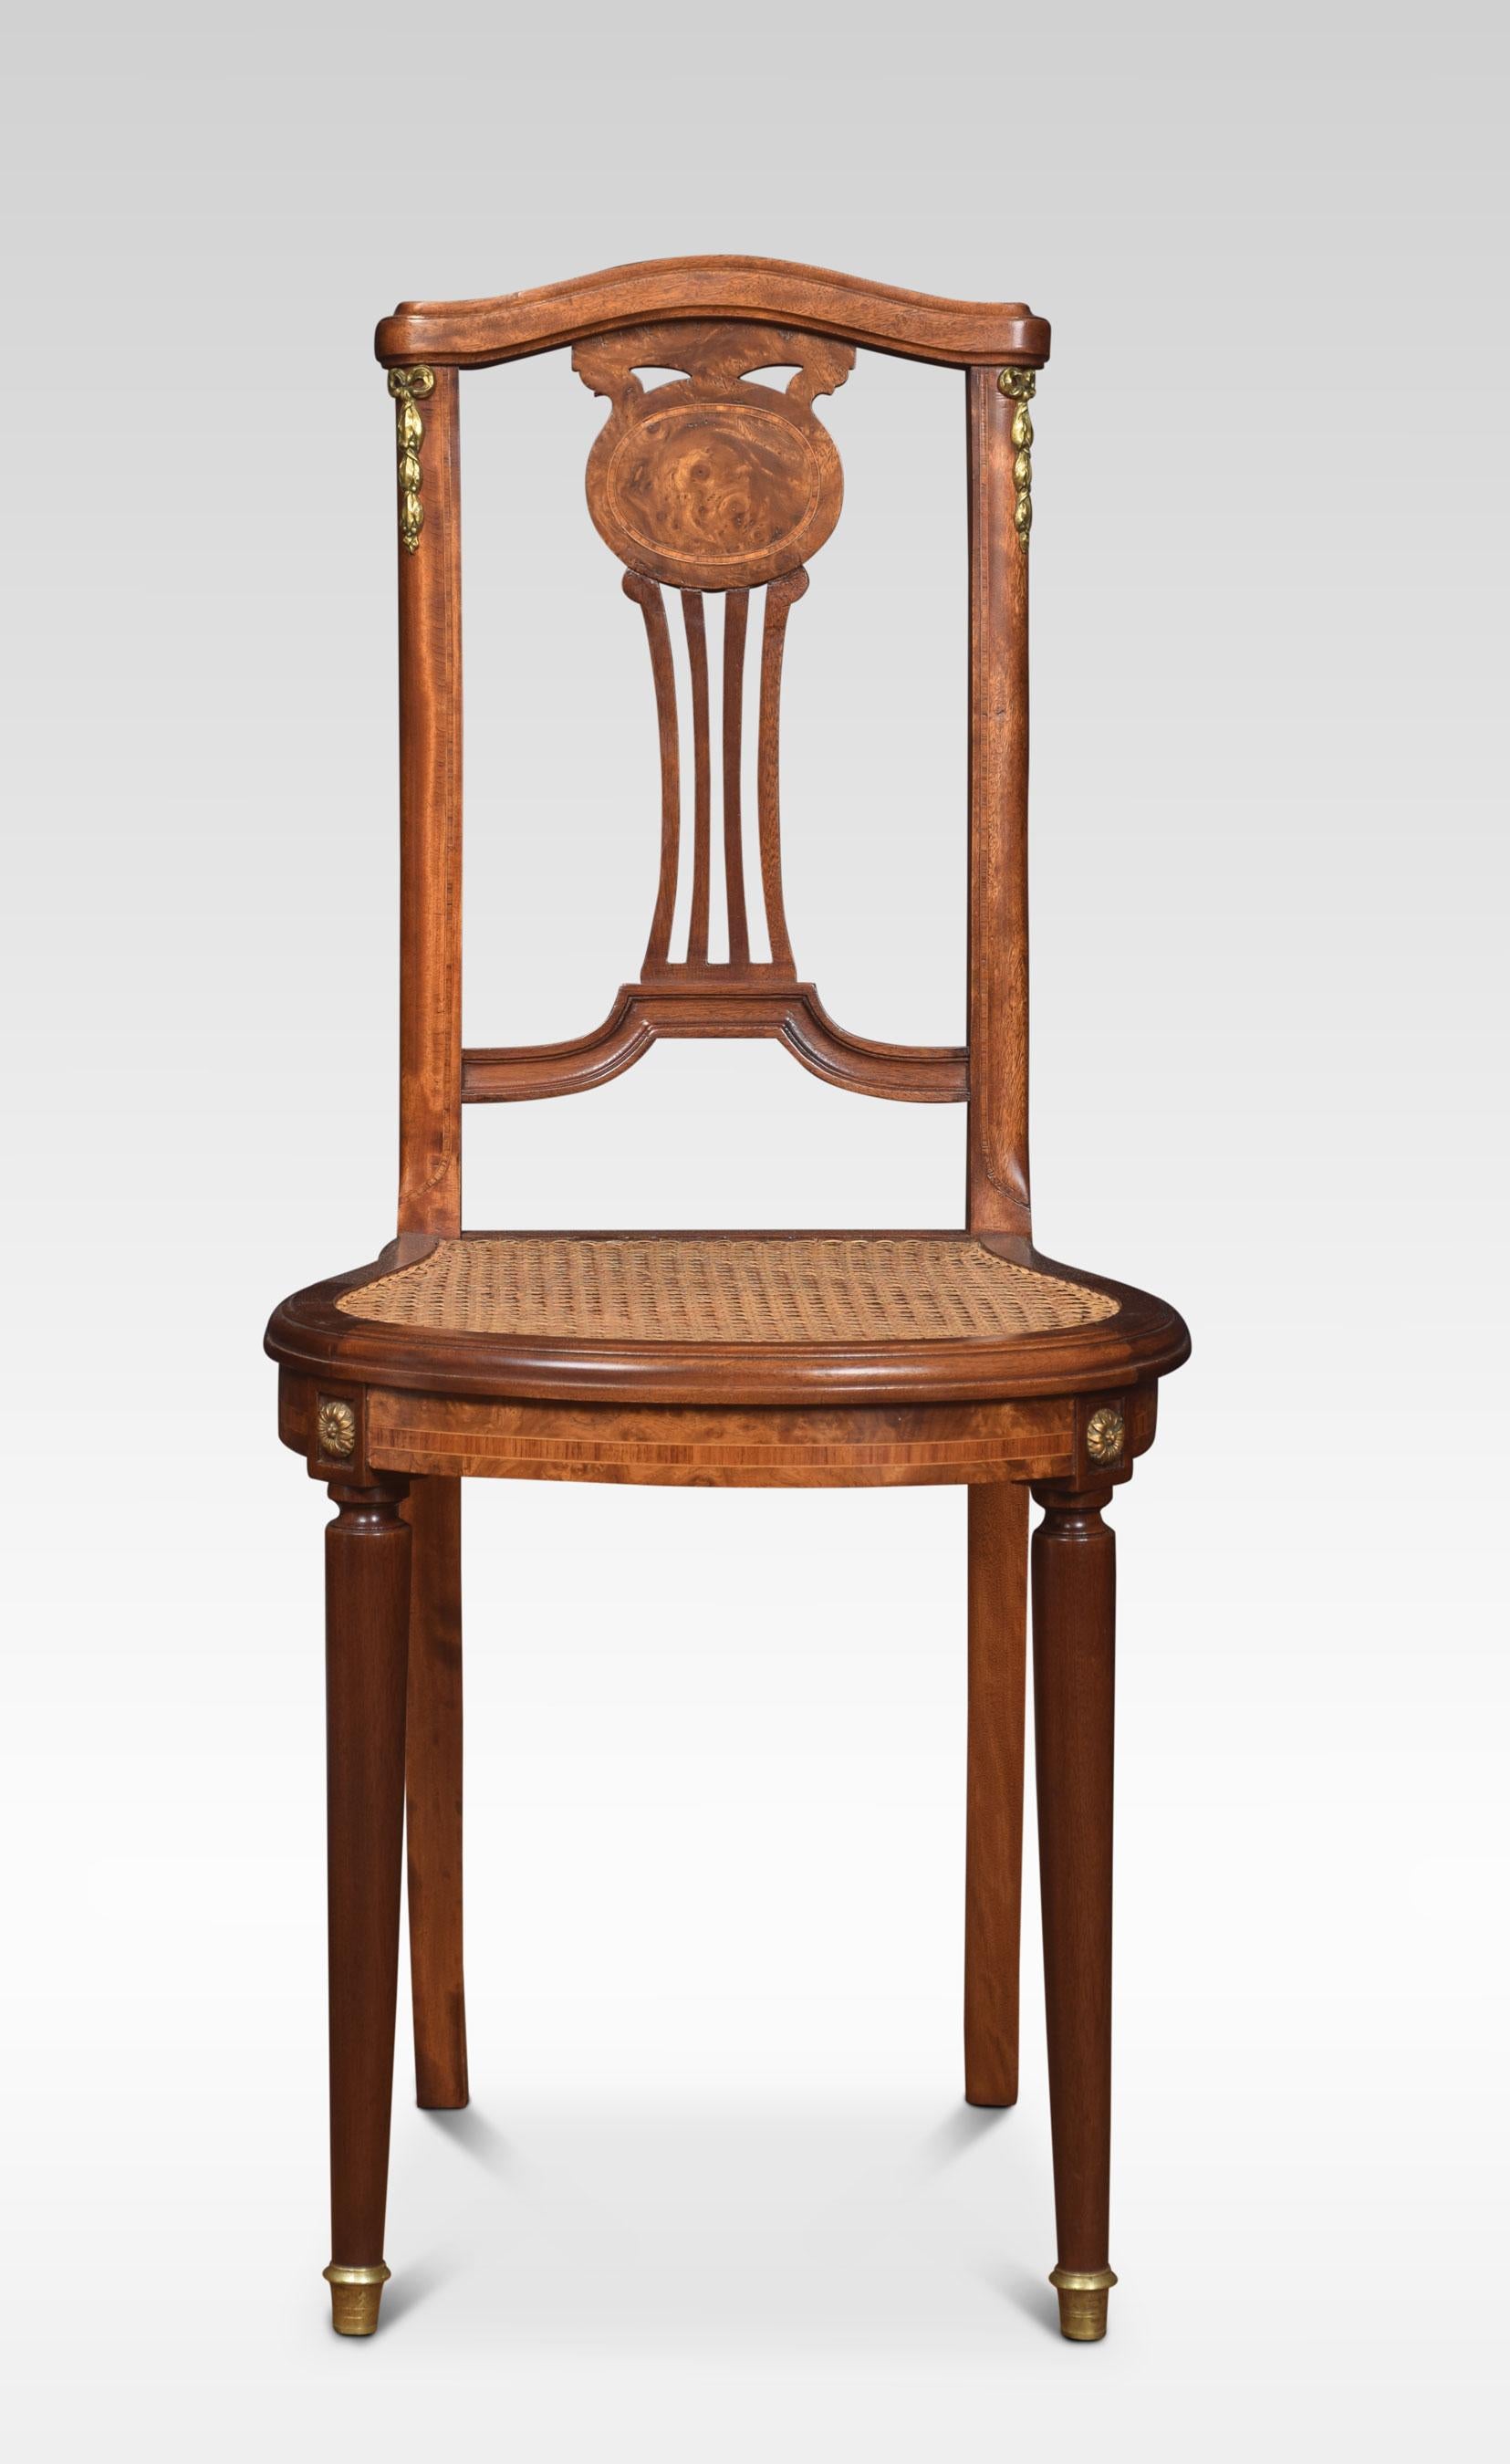 Pair of bergere side chairs, the shaped top rail above inlaid splat back to the inset berger seats. All raised up on fluted front legs terminating in brass feet.
Dimensions
Height 36.5 Inches height to seat 18 Inches
Width 16 Inches
Depth 17